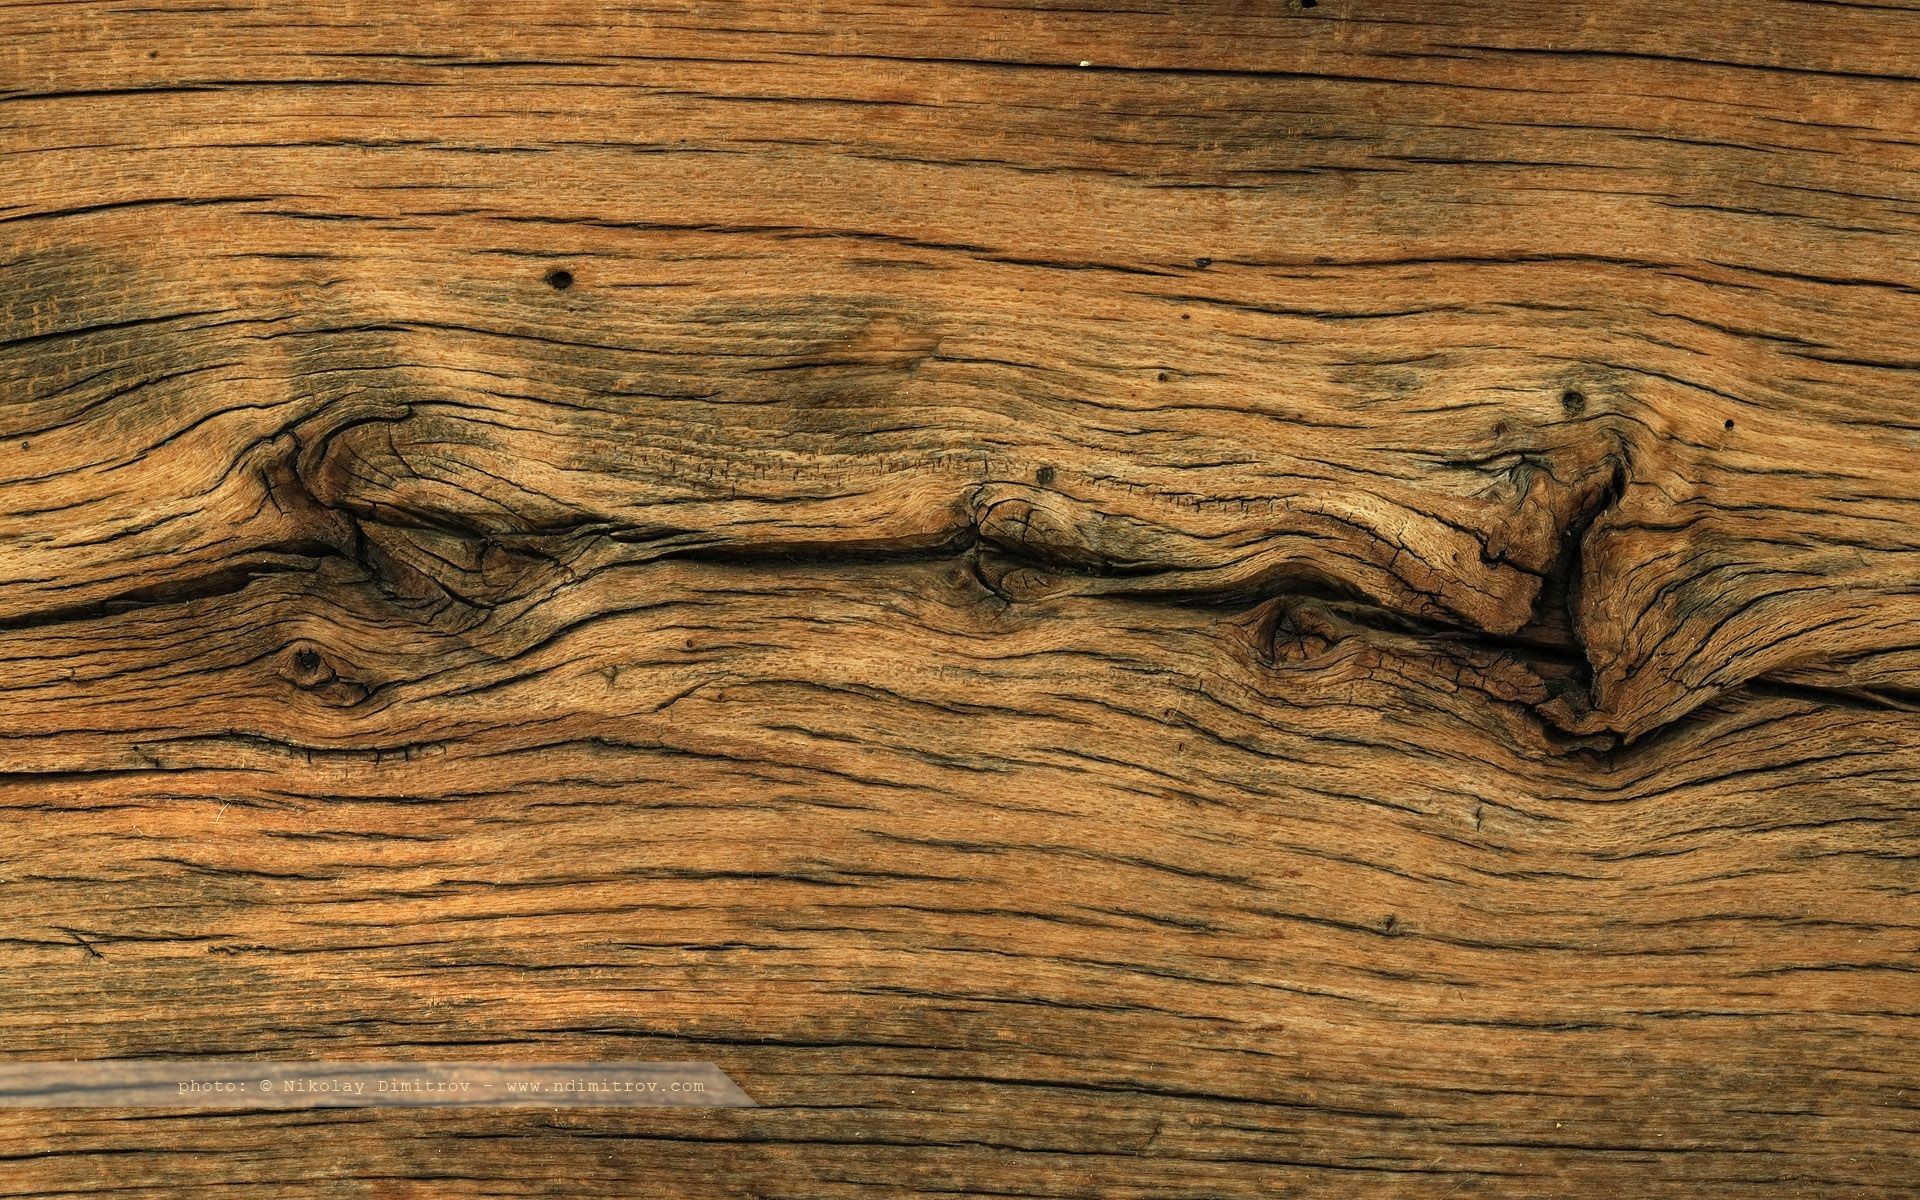 1920x1200 wood textures - Google Search